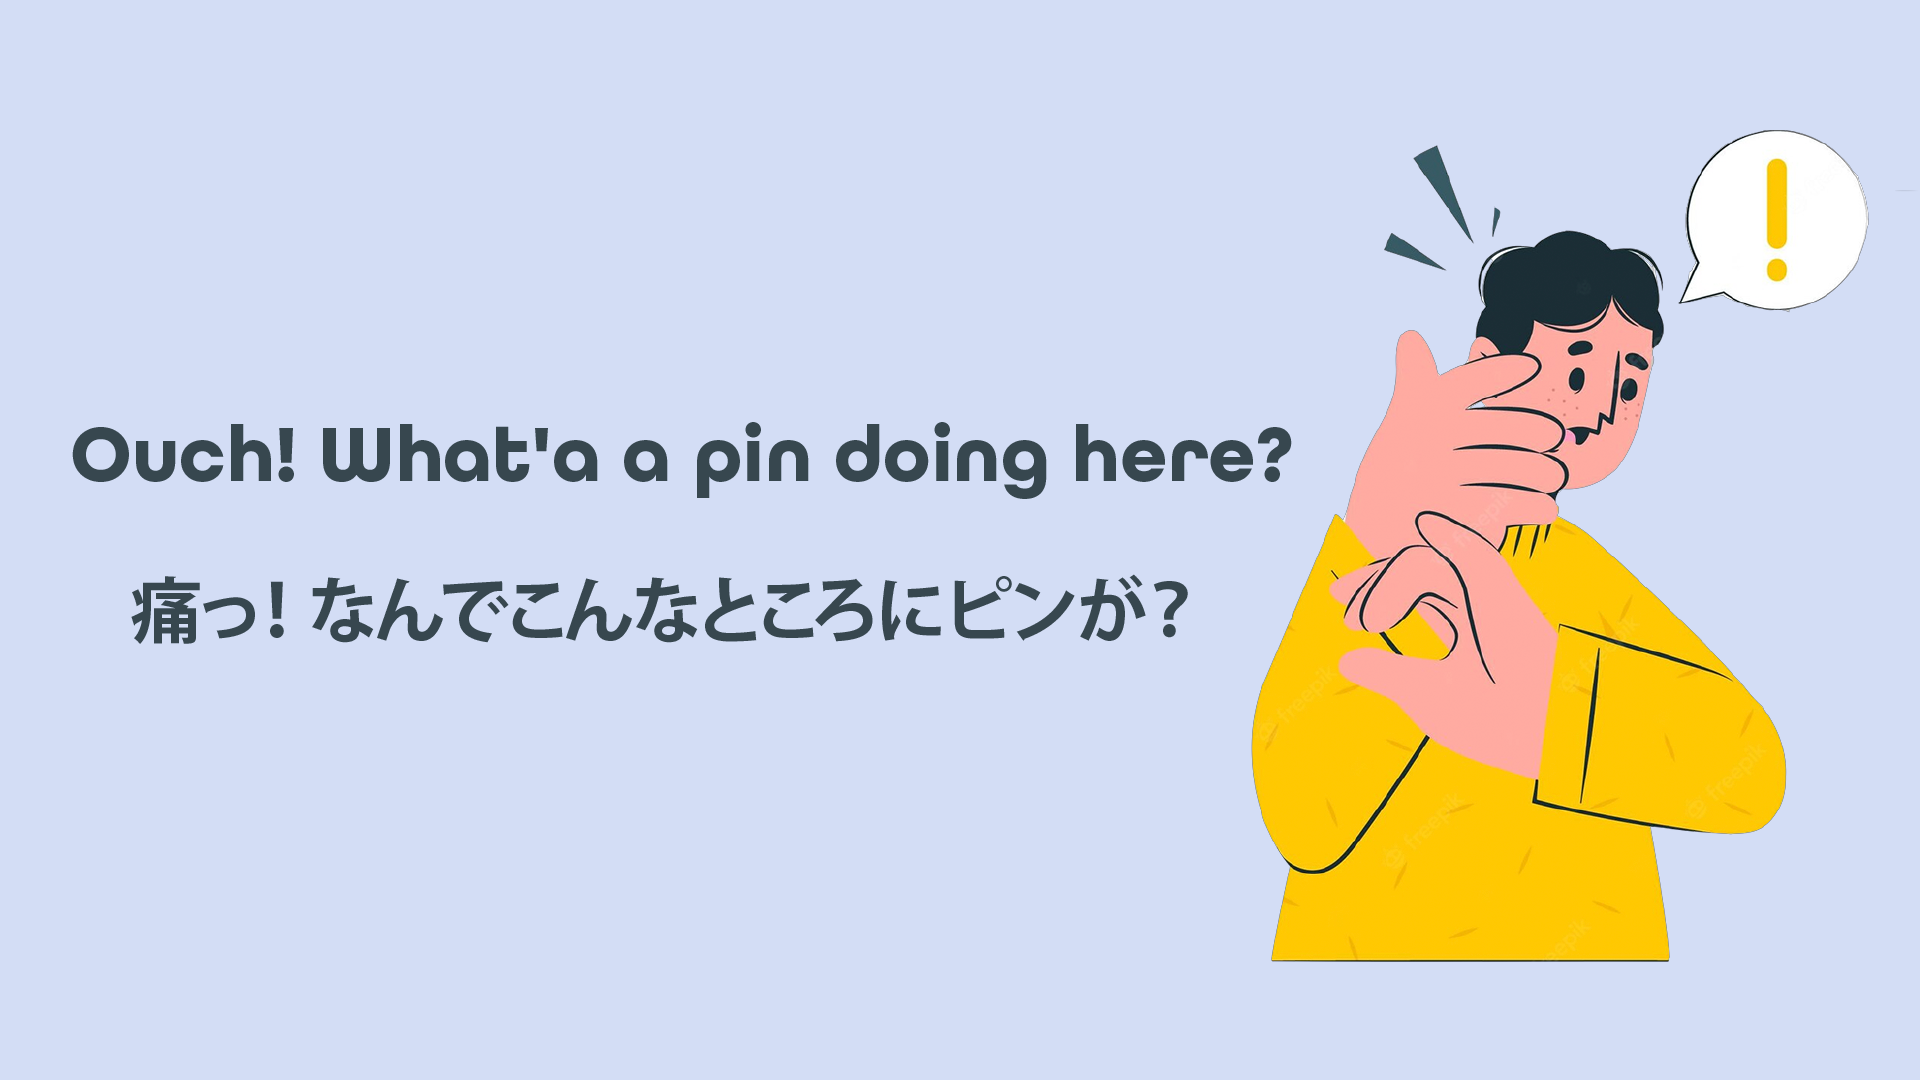 Ouch! What’a a pin doing here? 痛っ！なんでこんなところにピンが？